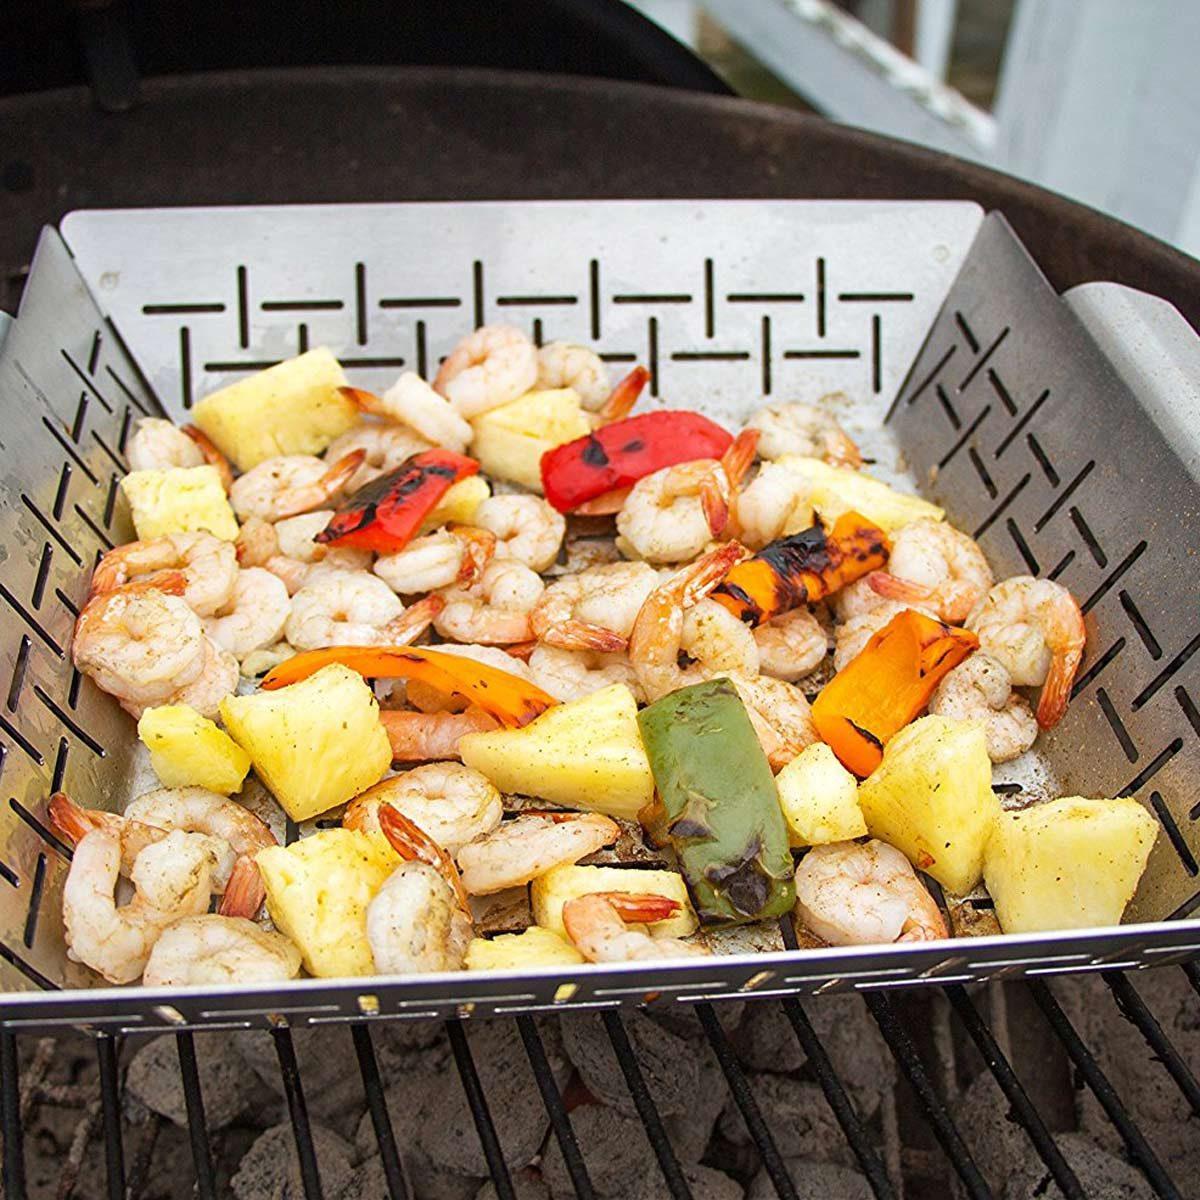 19 Essential Grilling Tools for a Successful Barbecue